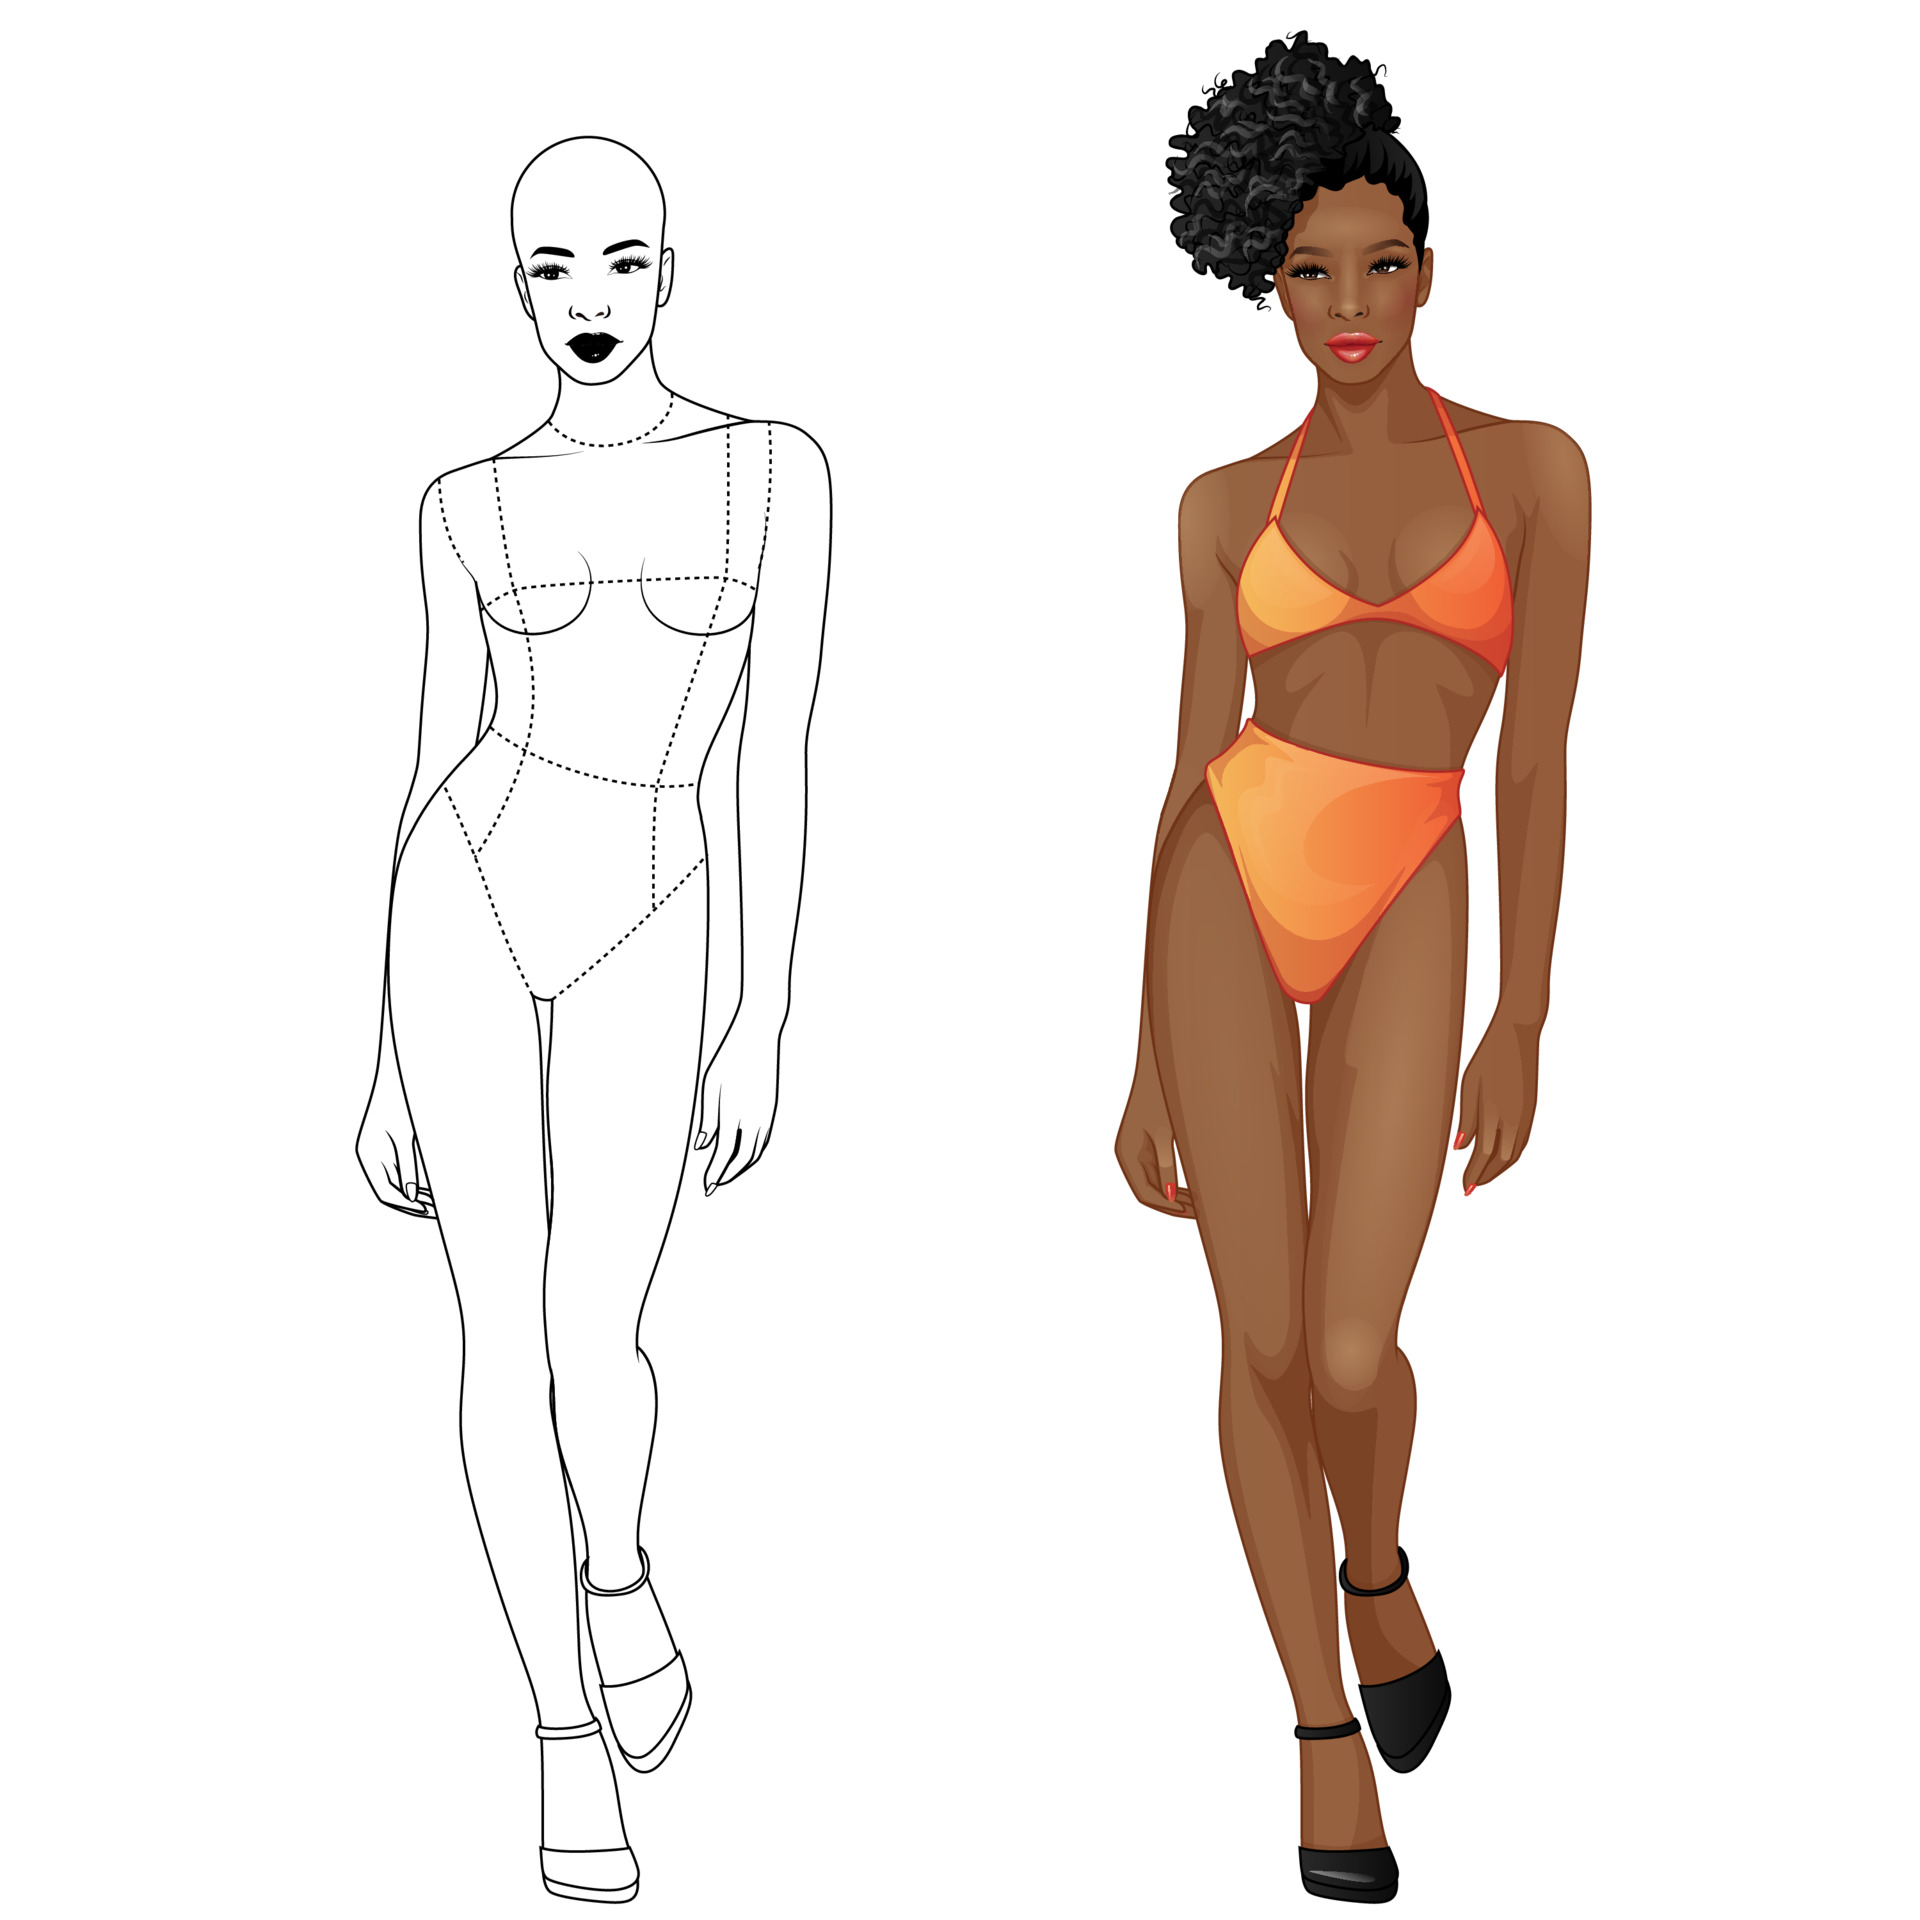 87,719 Fashion Body Sketch Images, Stock Photos & Vectors | Shutterstock